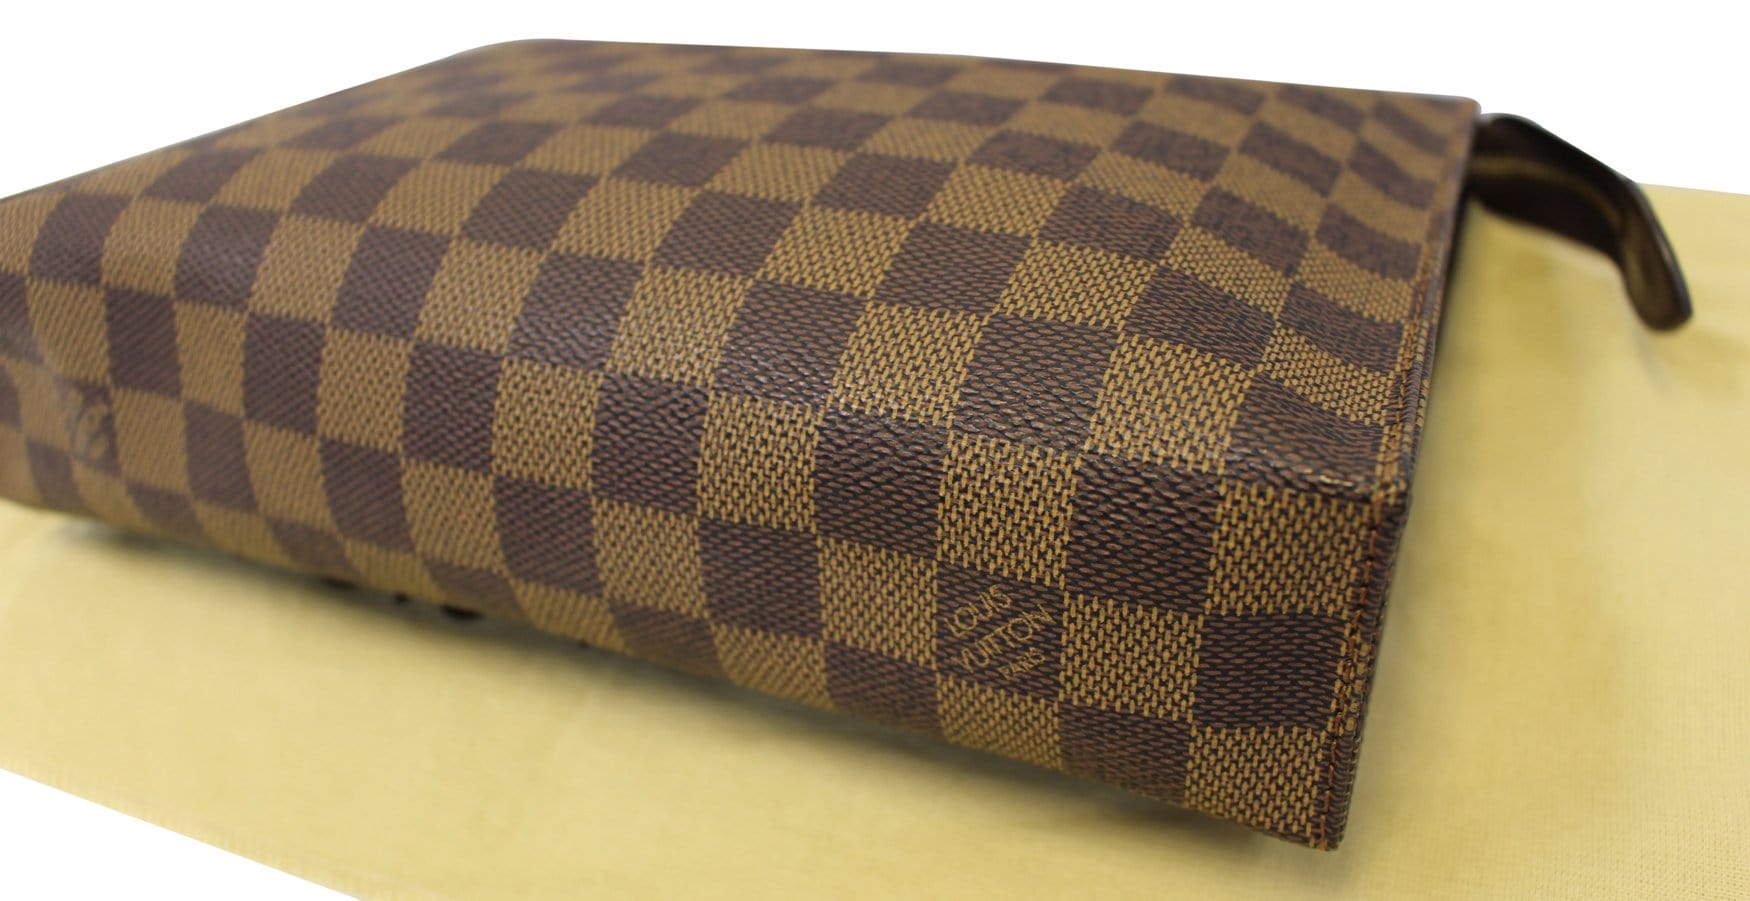 Brand New Louis Vuitton Toiletry Pouch 26 M47542